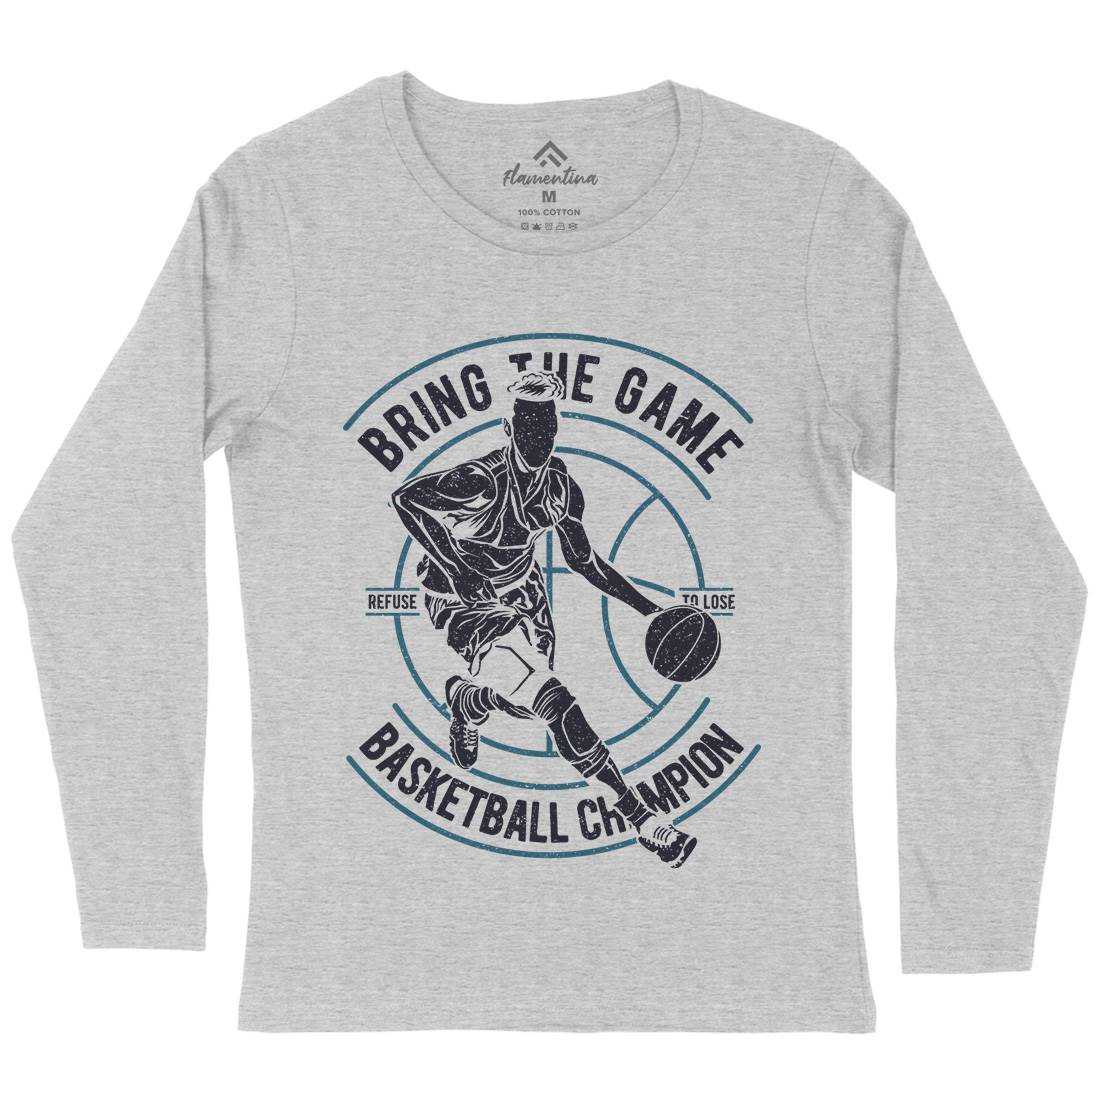 Bring The Game Womens Long Sleeve T-Shirt Sport A627